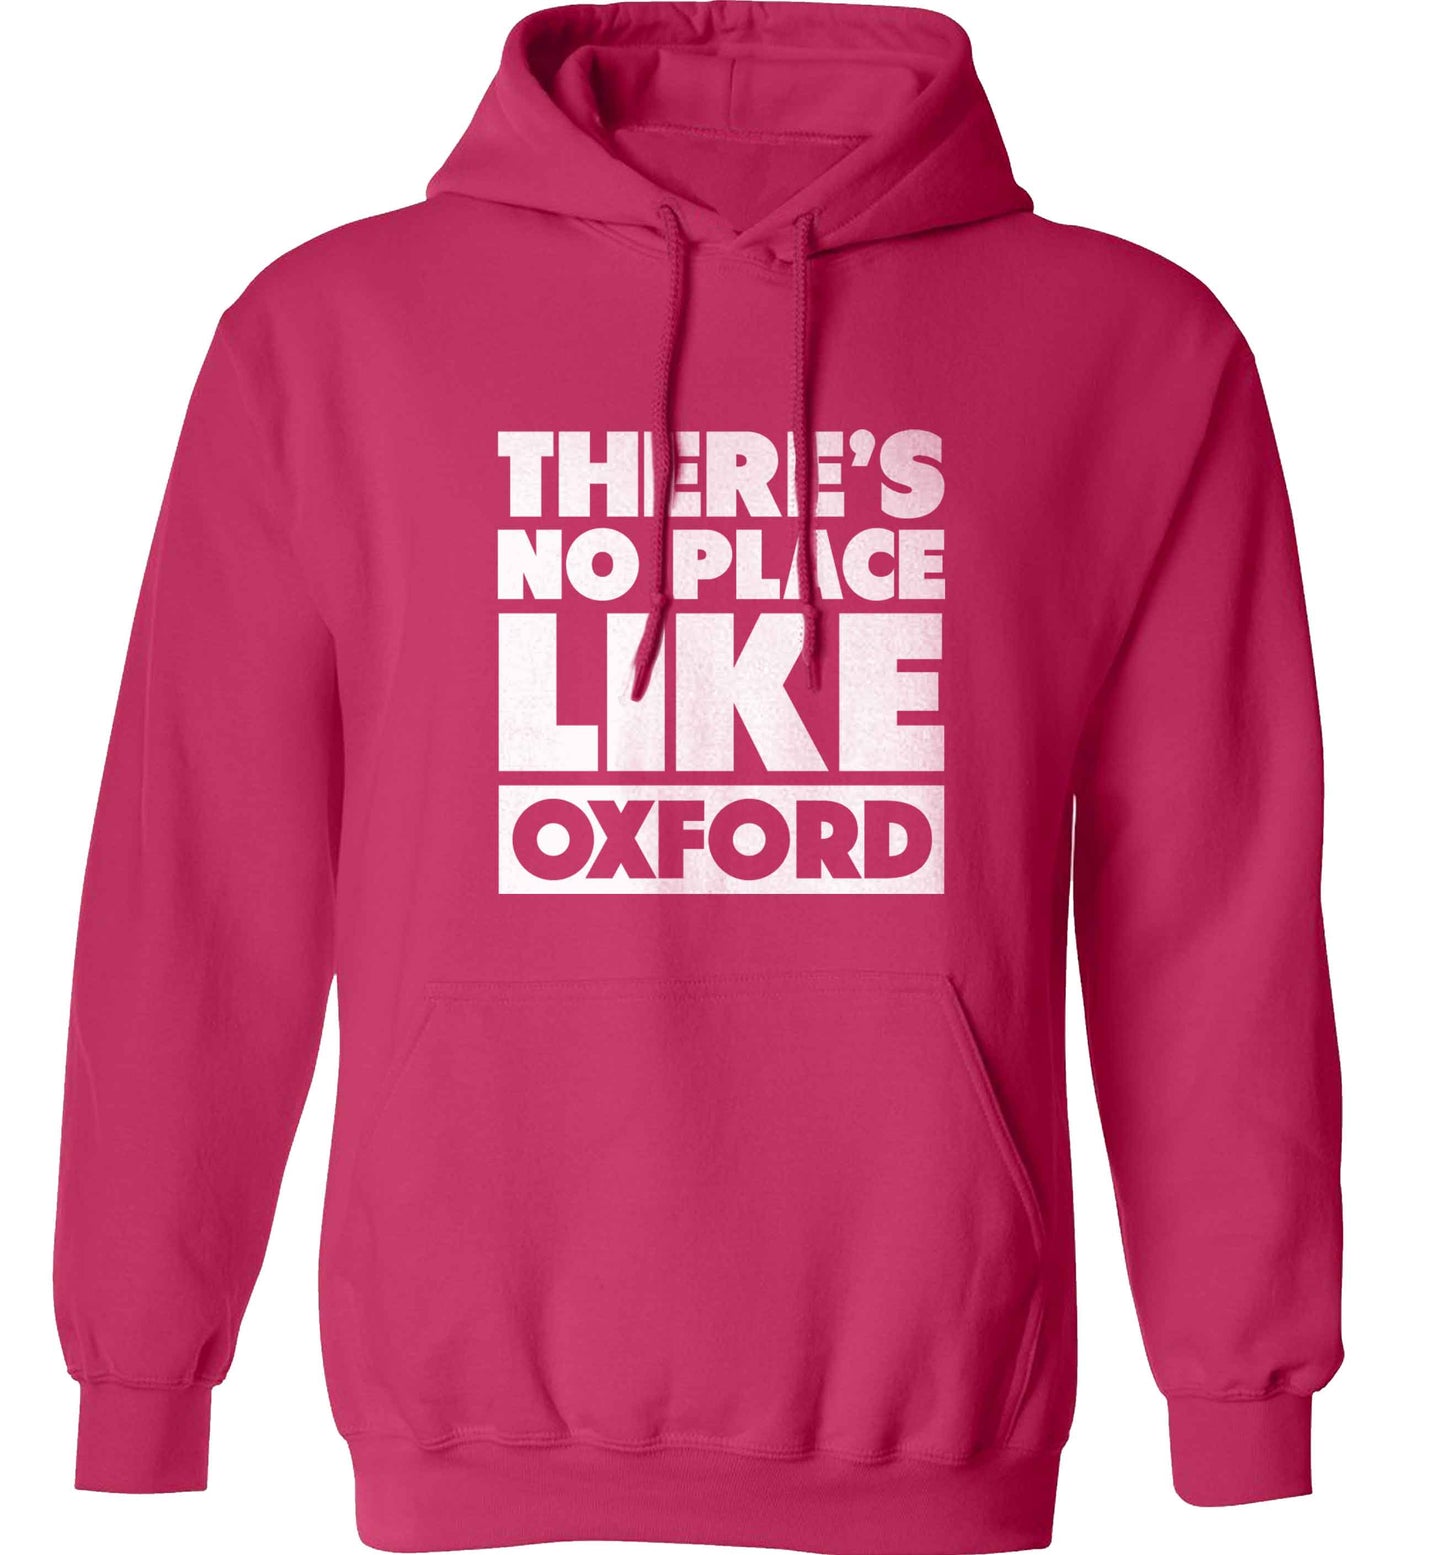 There's no place like Oxford adults unisex pink hoodie 2XL